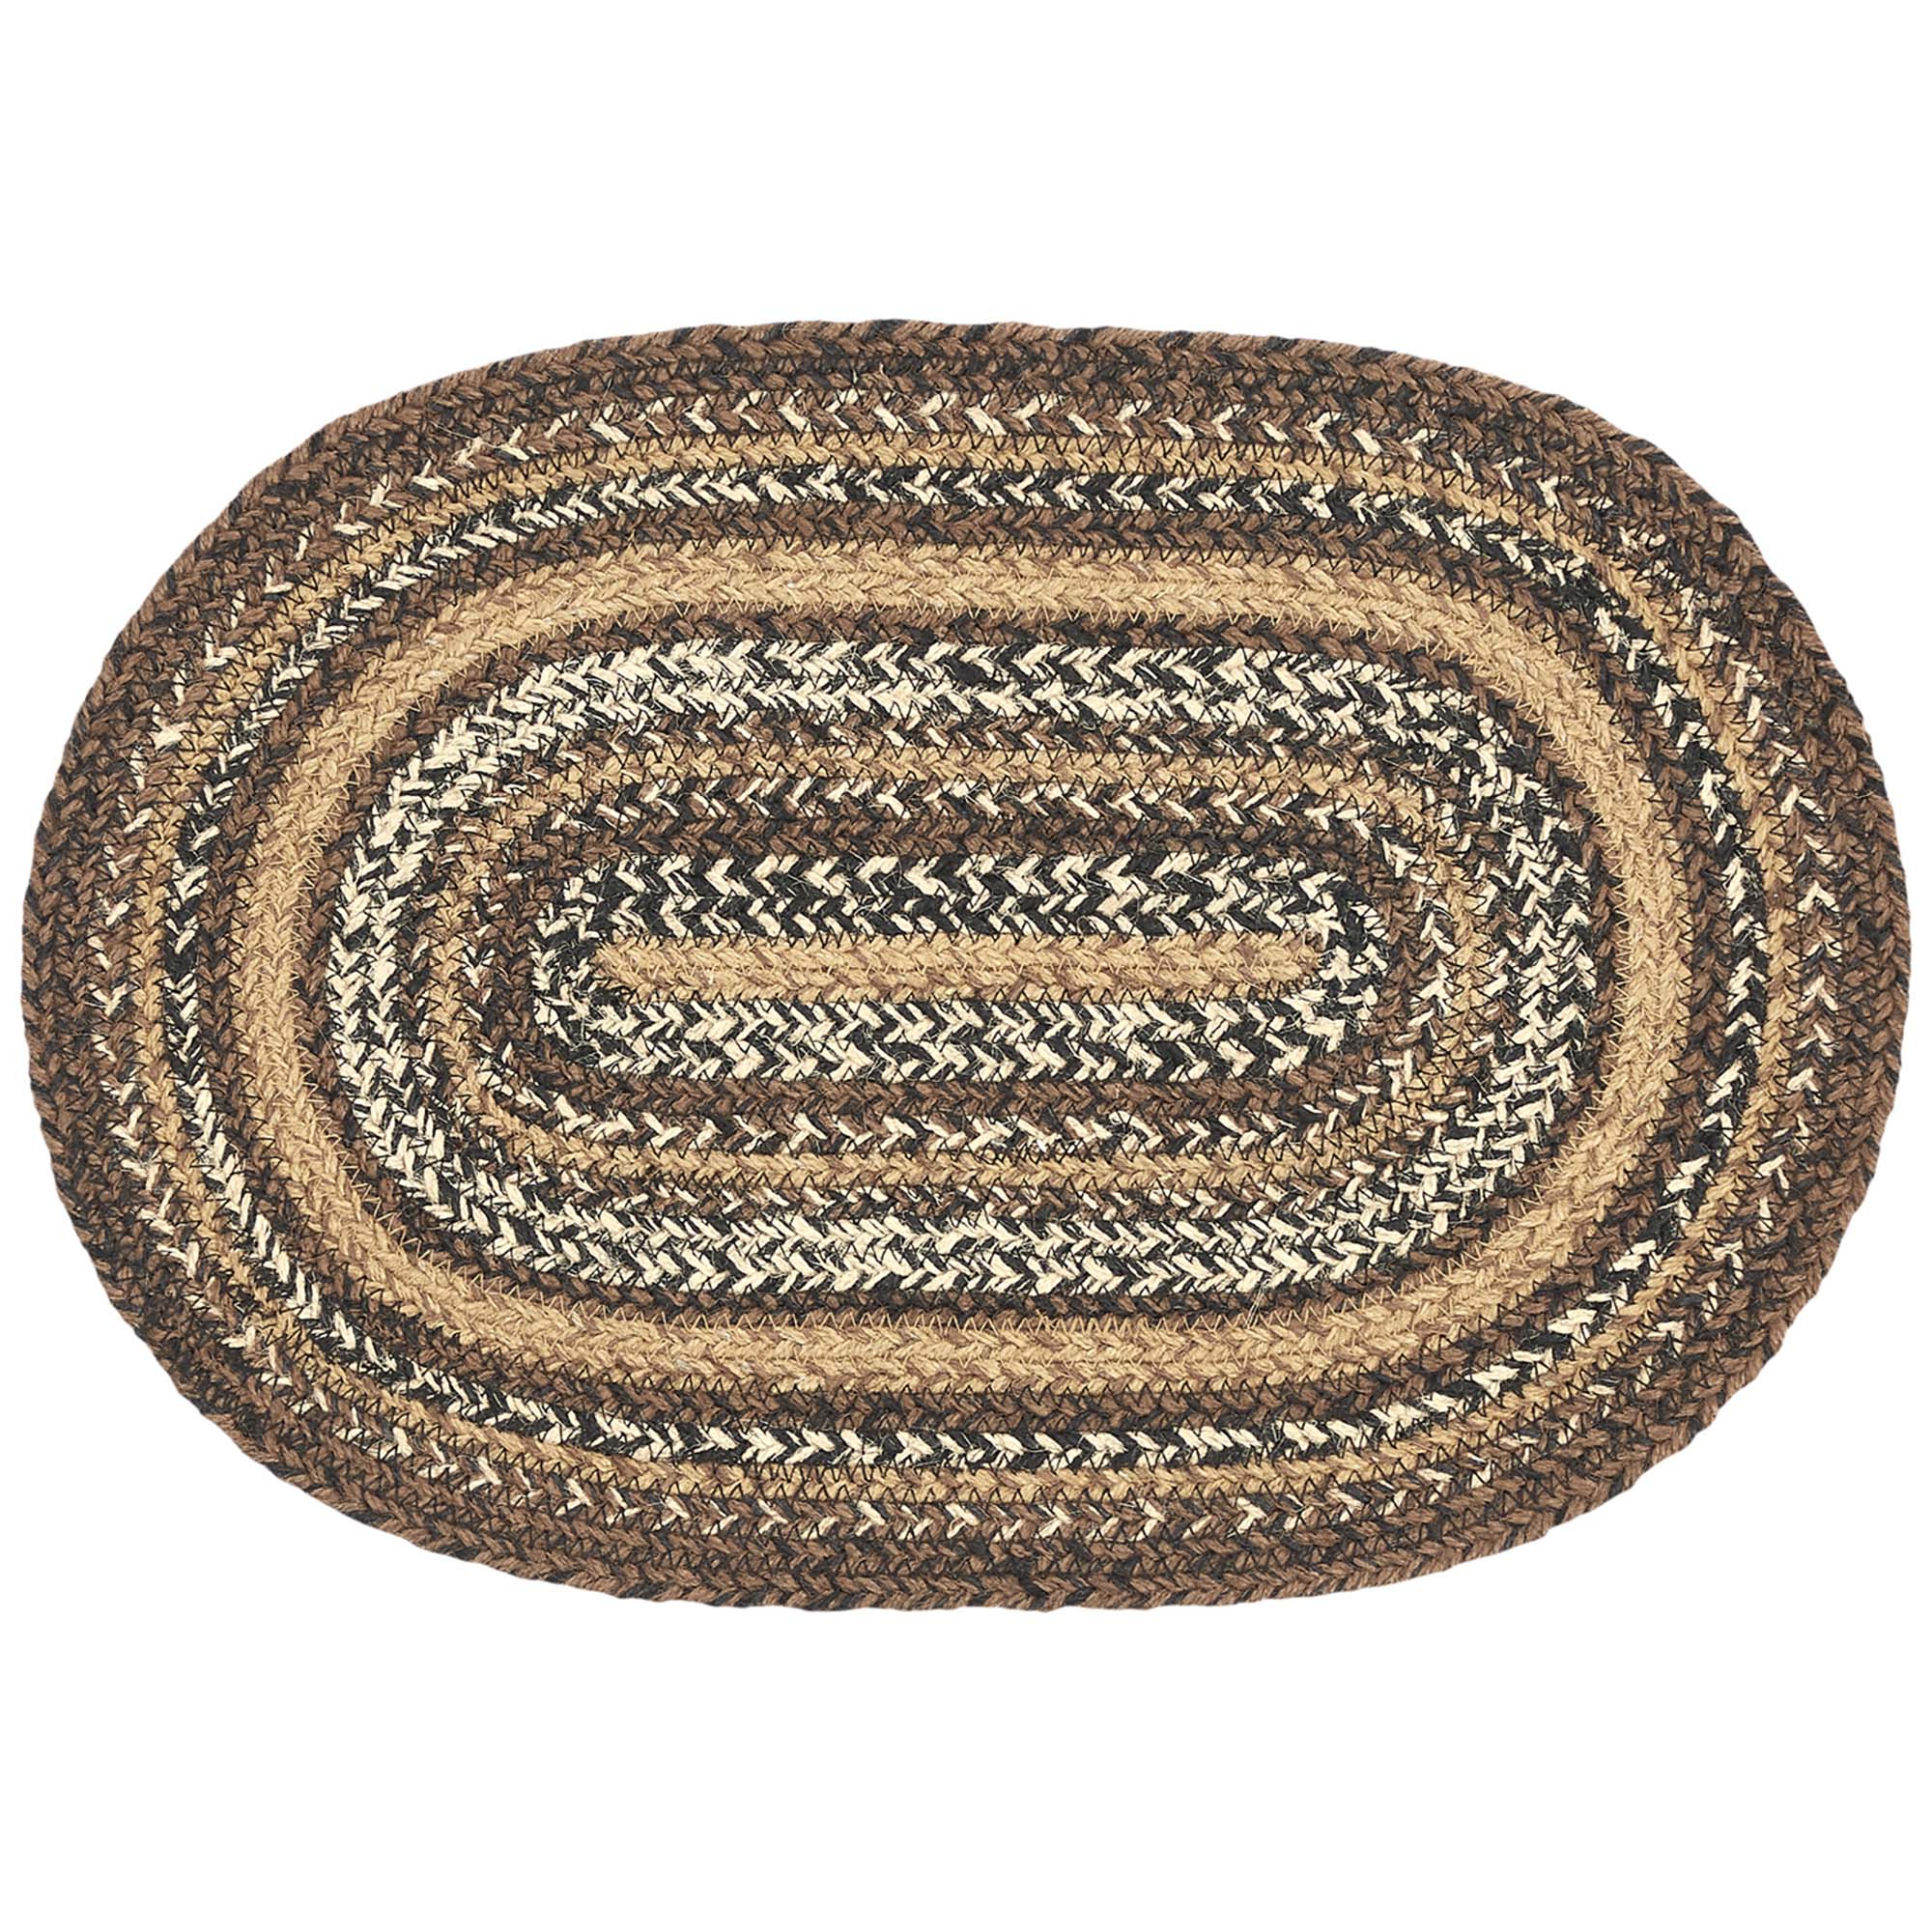 Oak & Asher Espresso Jute Oval Placemat 12x18 By VHC Brands